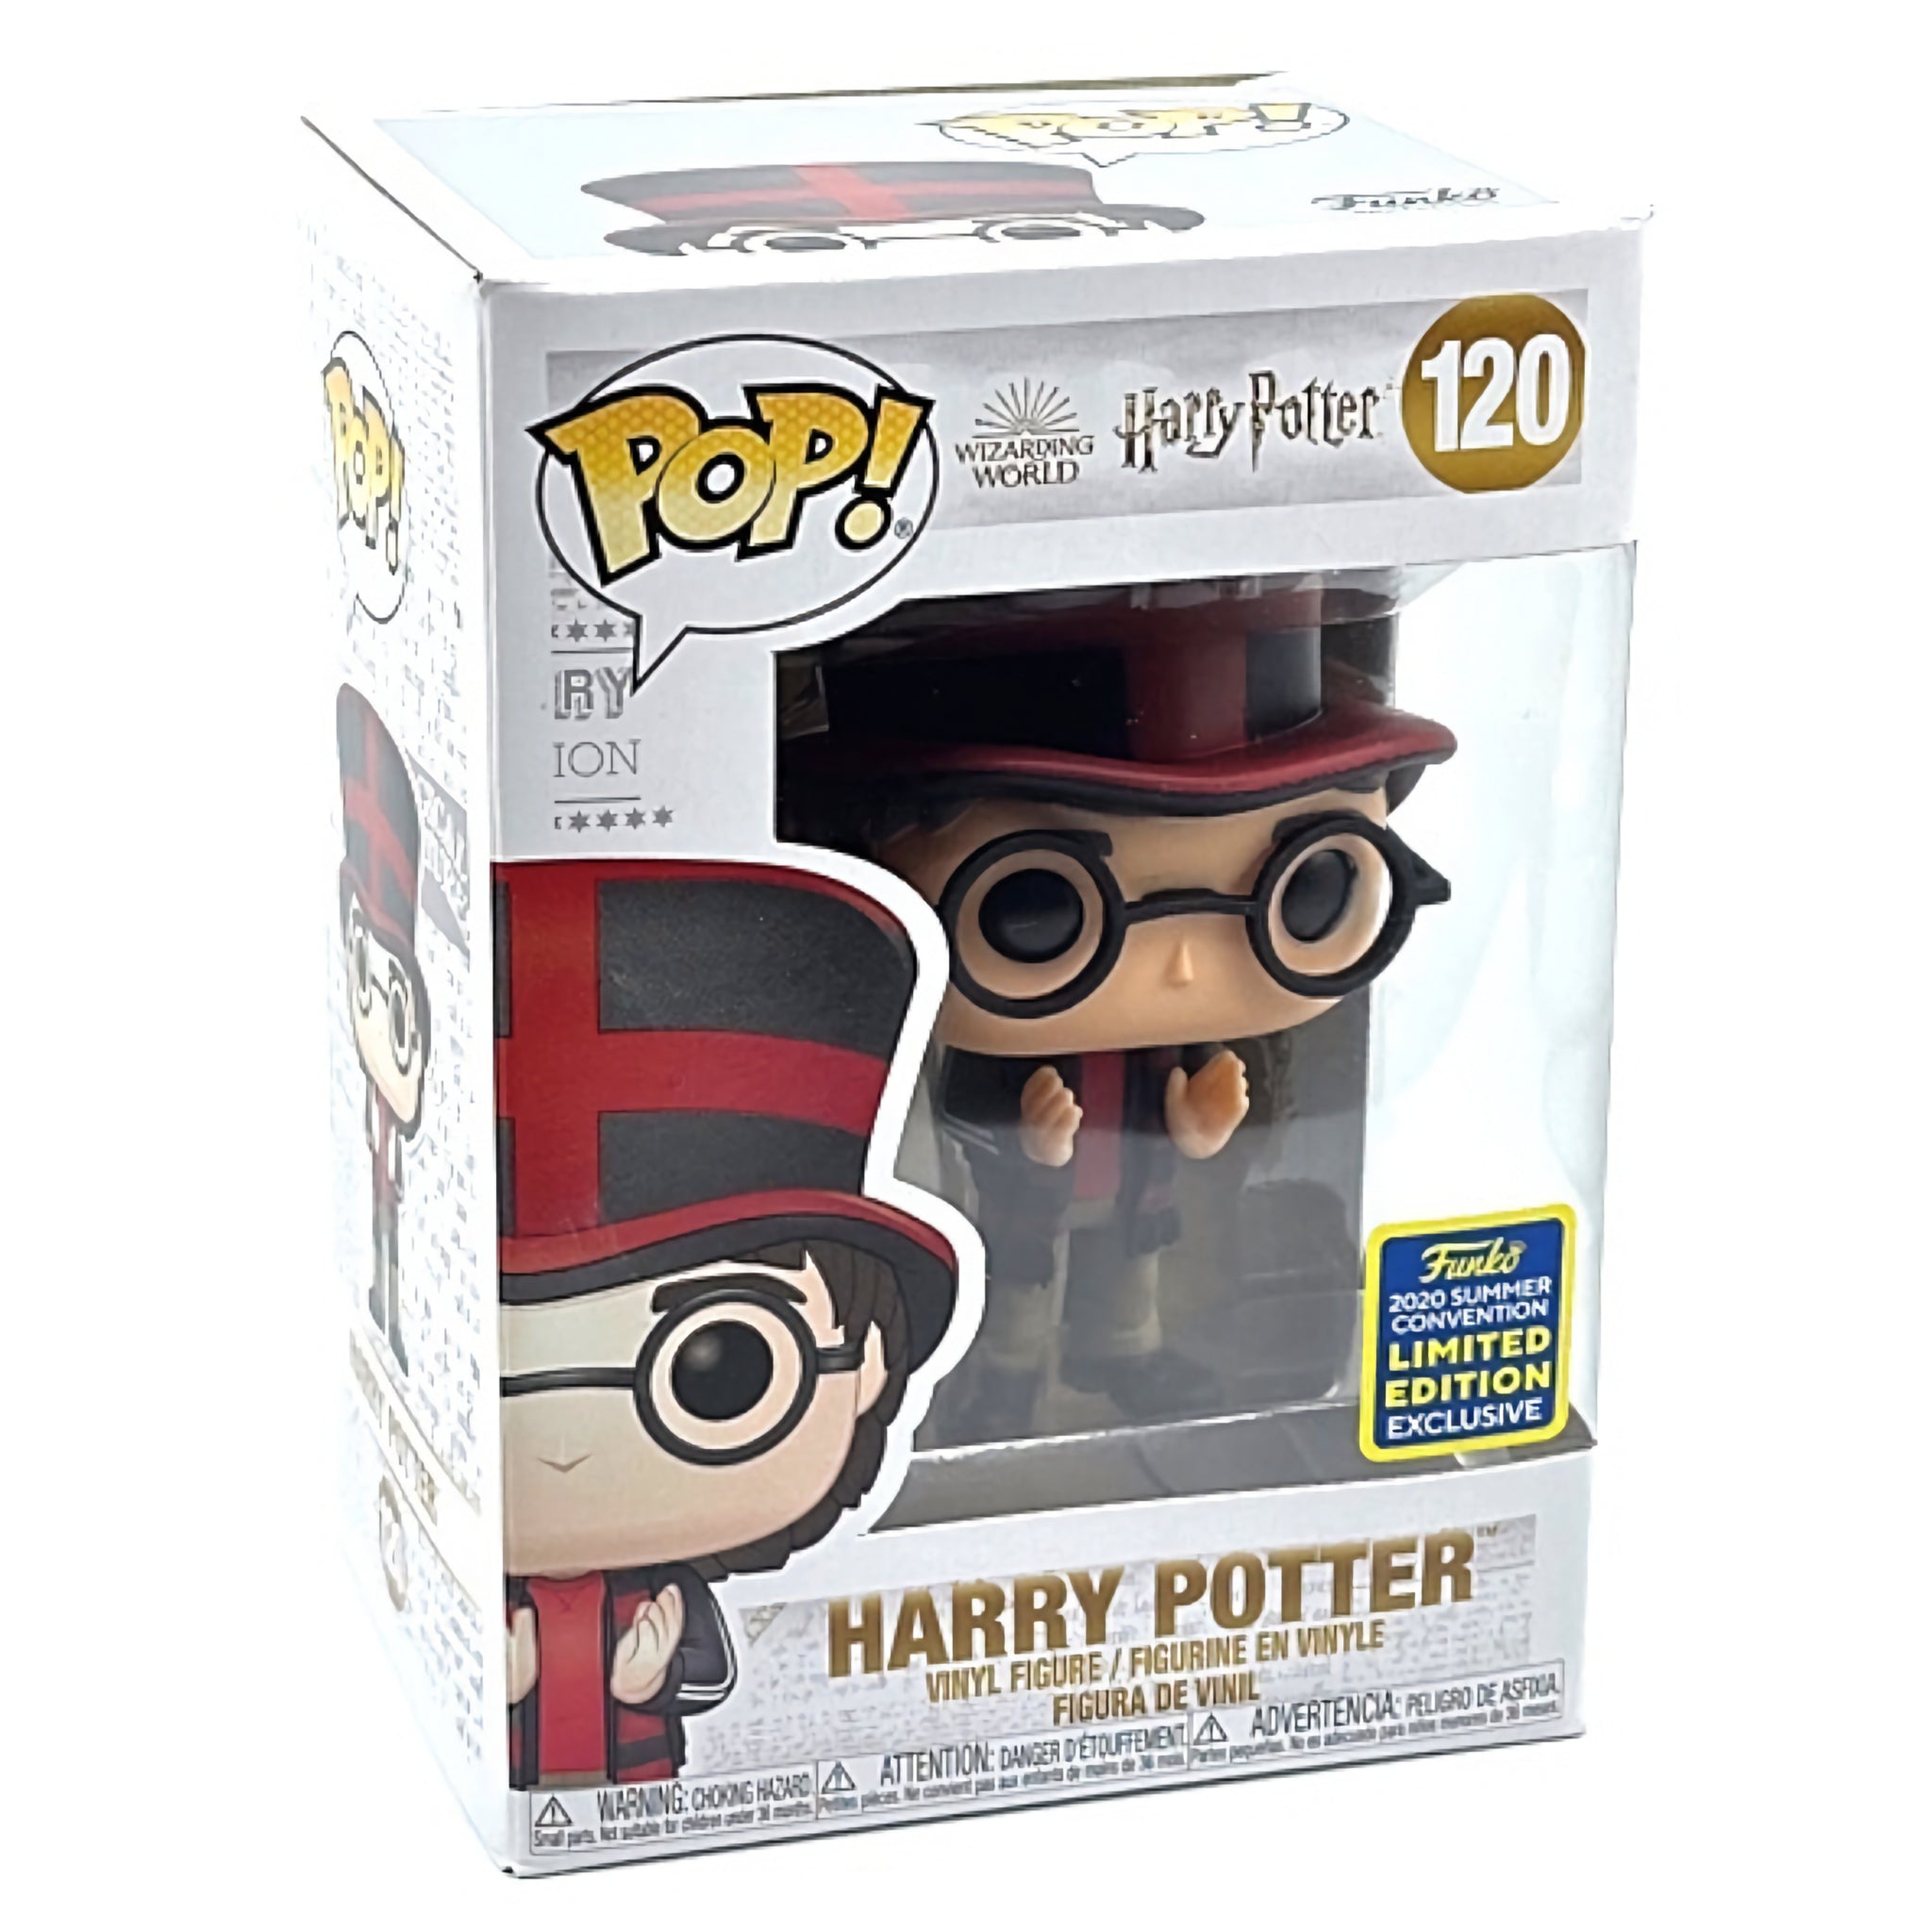 Harry Potter (World Cup) Funko Pop! 2020 SDCC